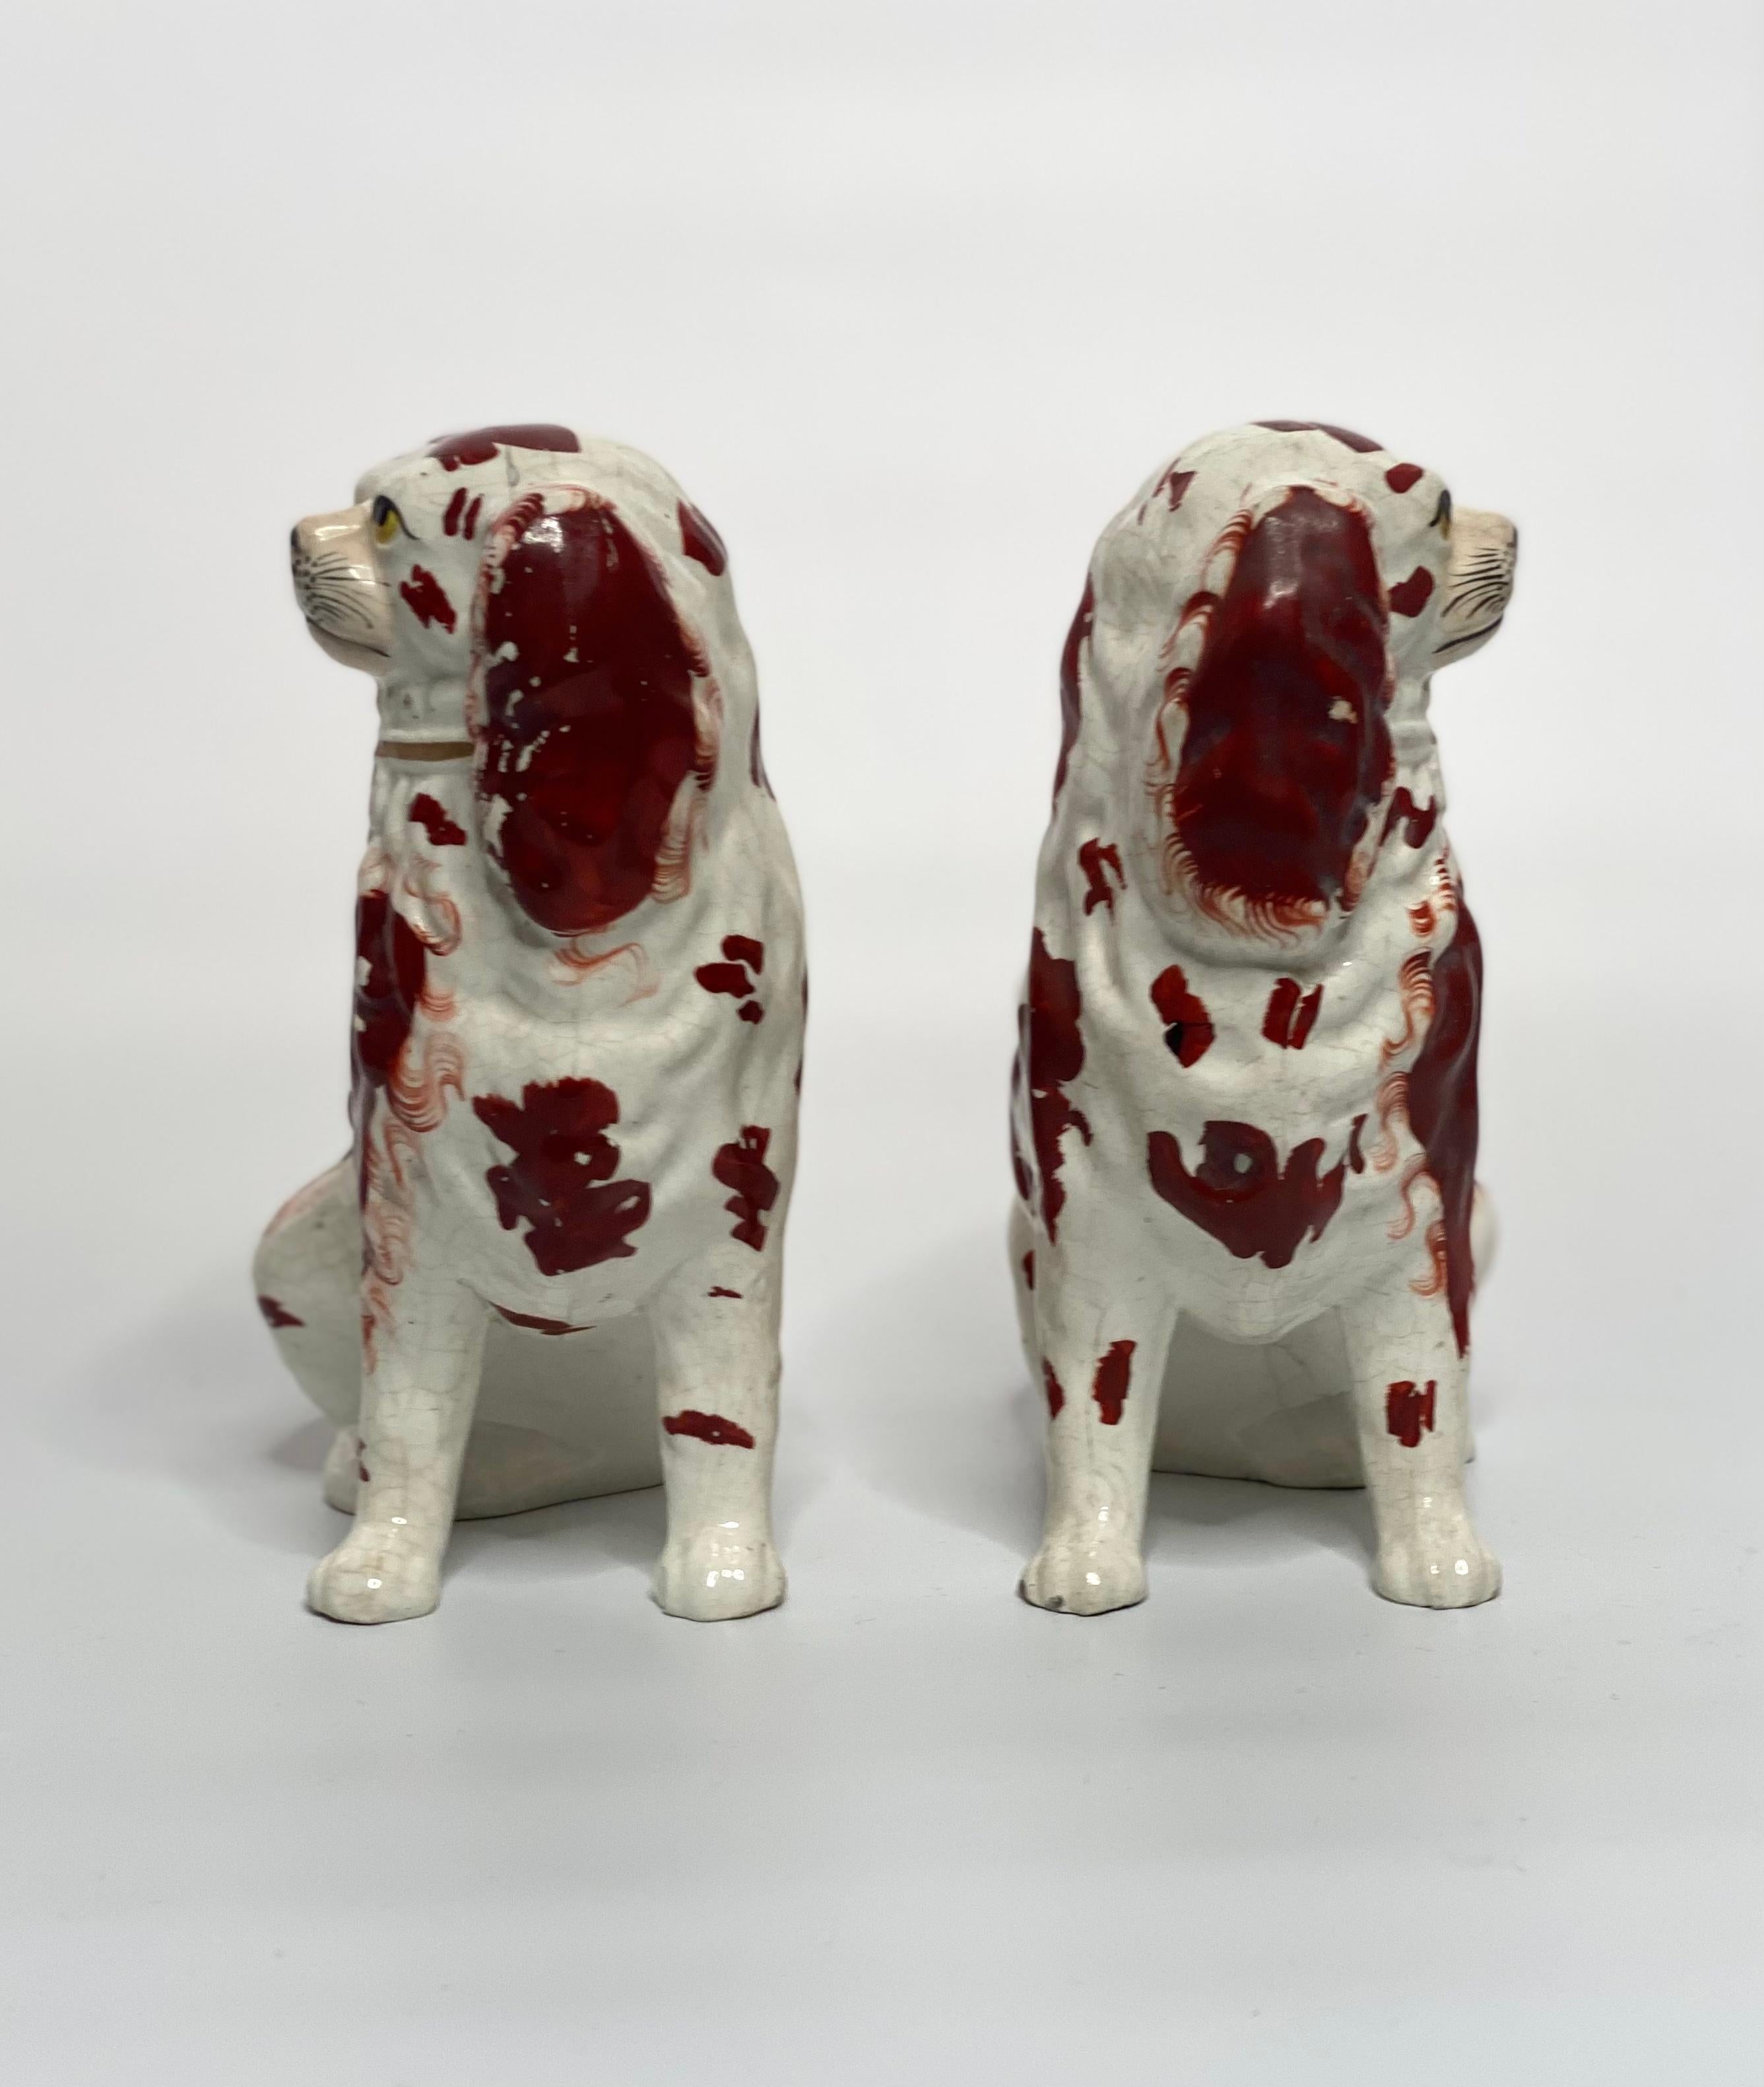 Fired Staffordshire Pottery Spaniels, circa 1850